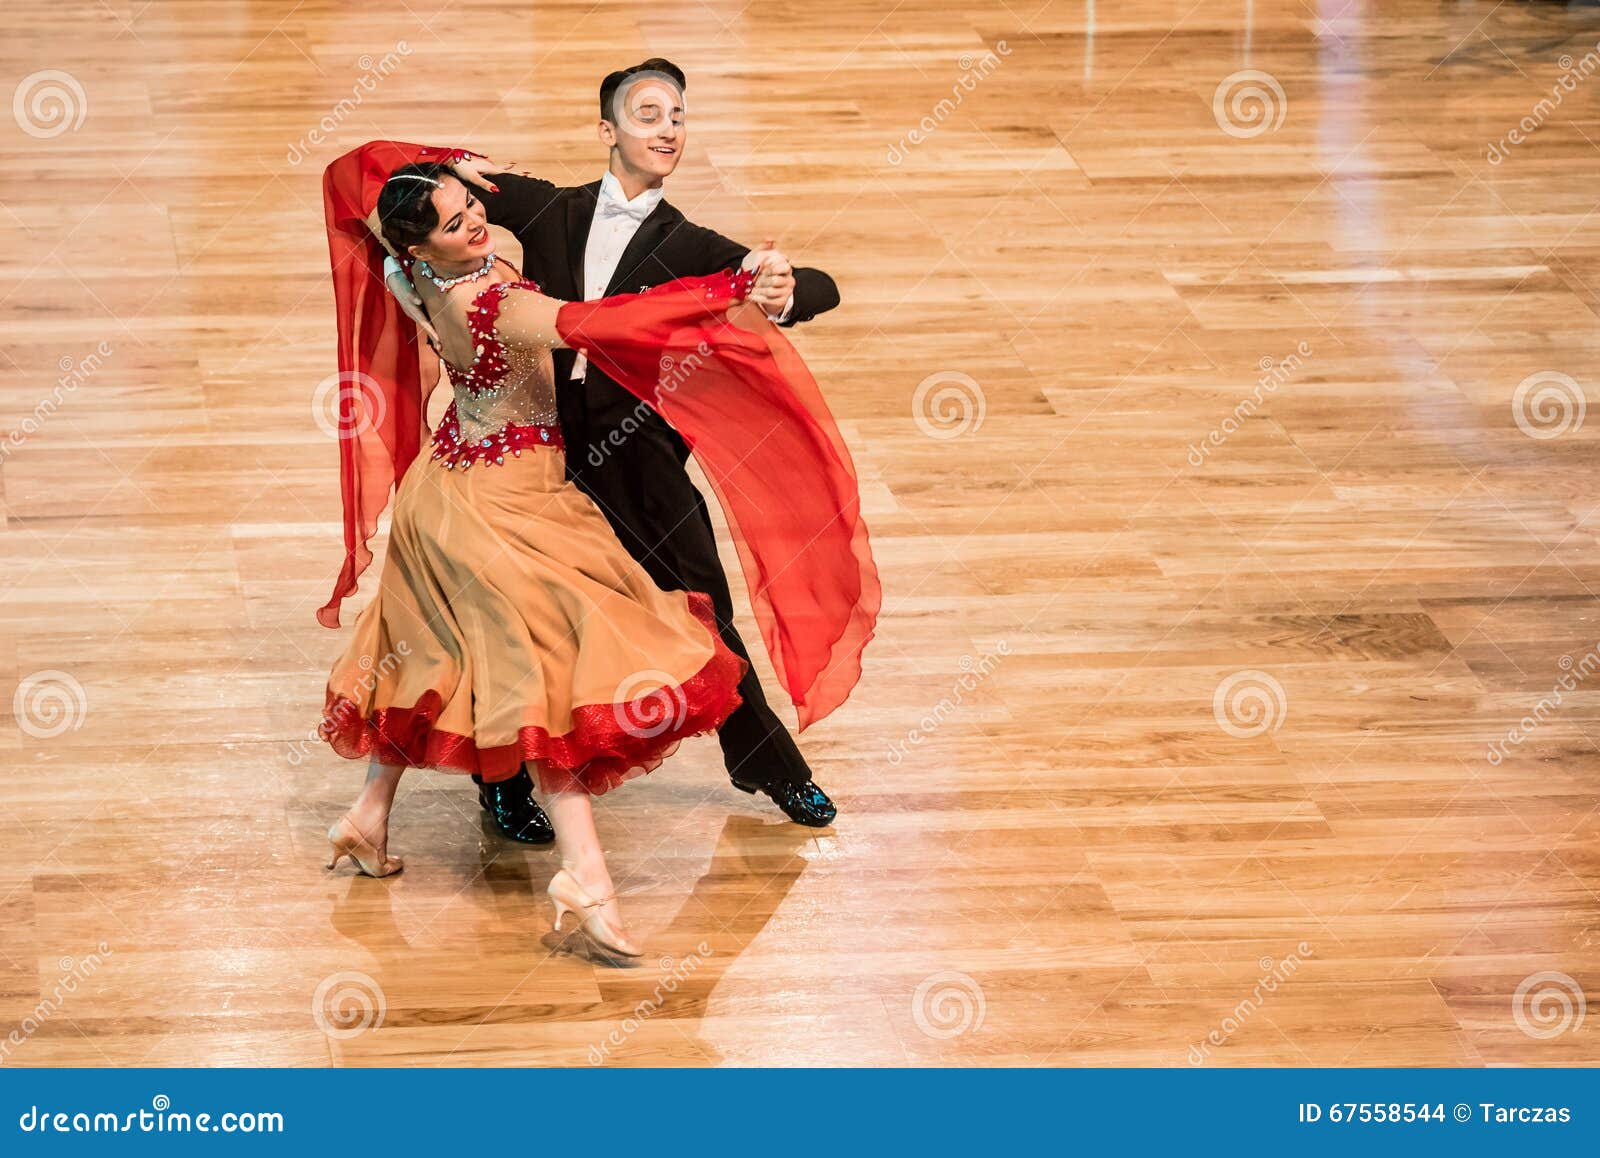 Competitors Dancing Slow Waltz or Tango Editorial Stock Image - Image ...